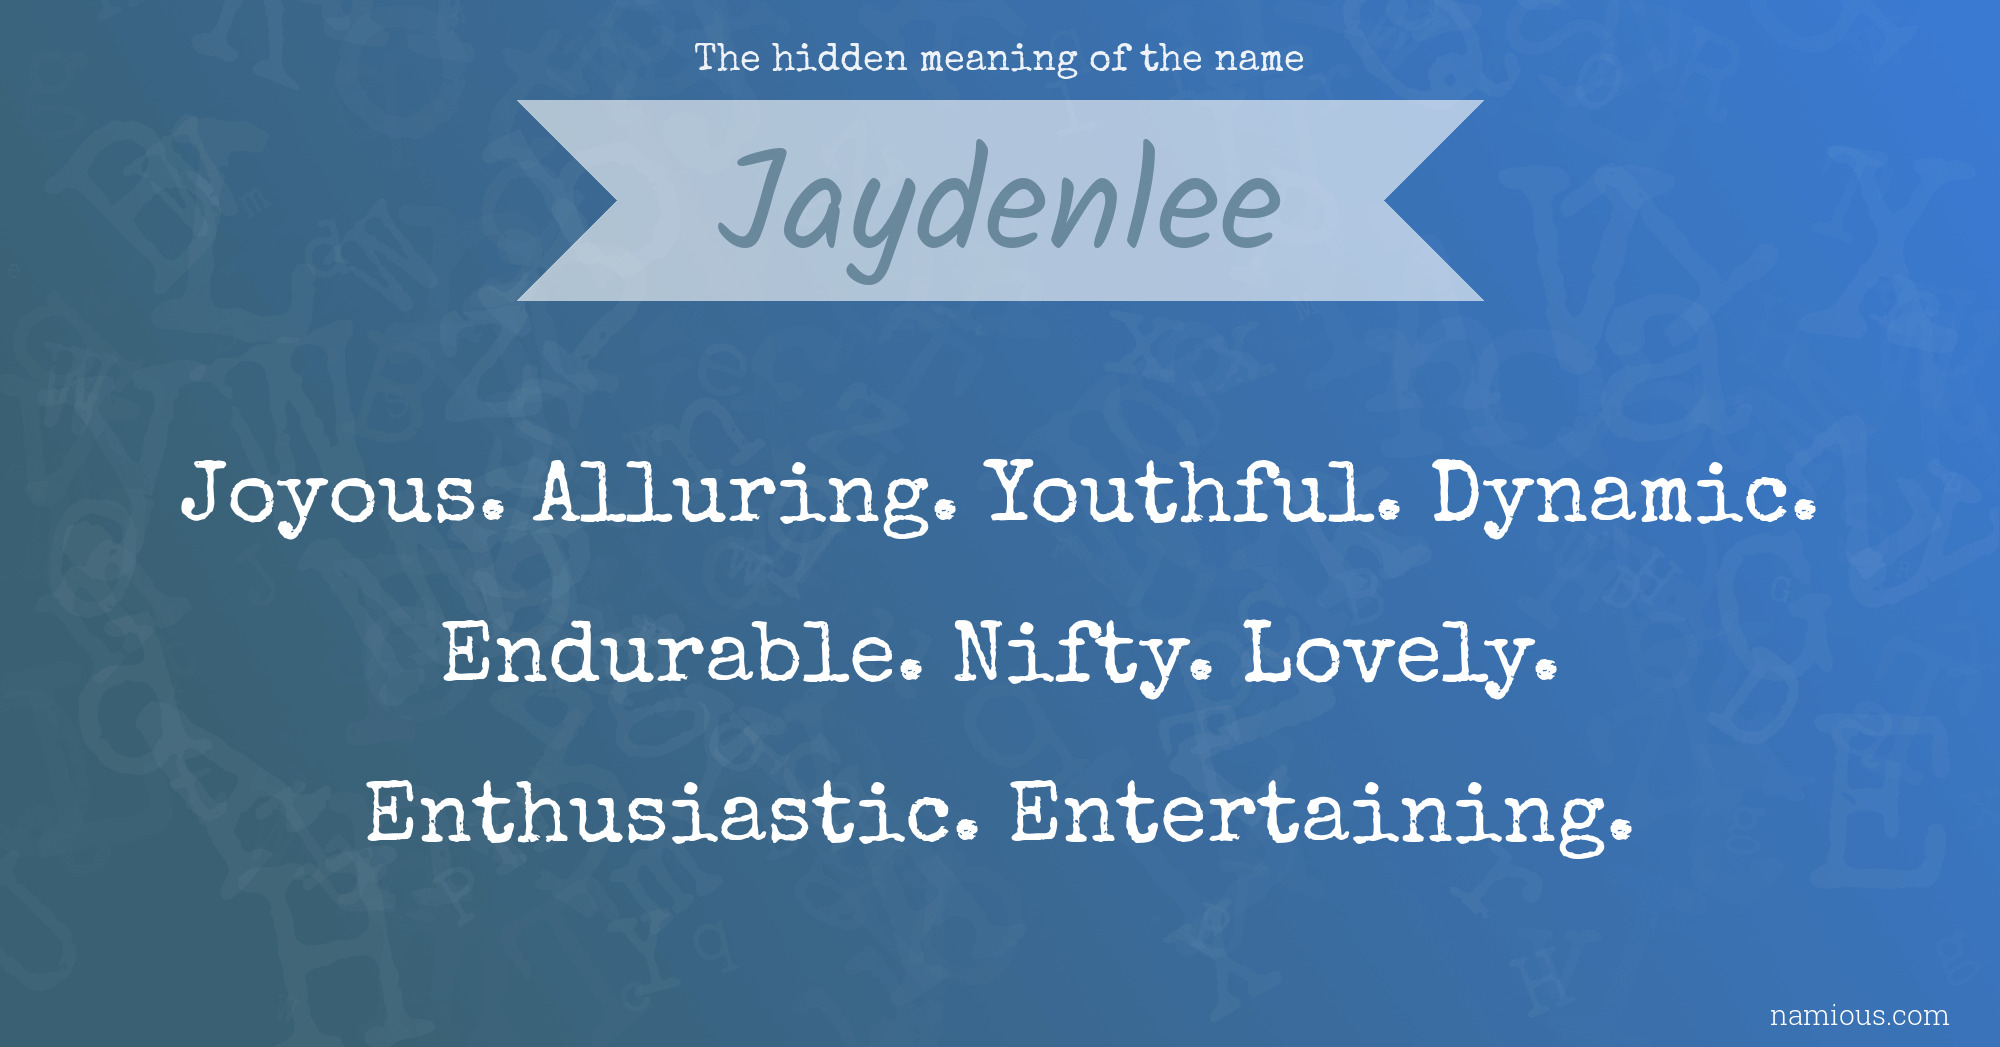 The hidden meaning of the name Jaydenlee